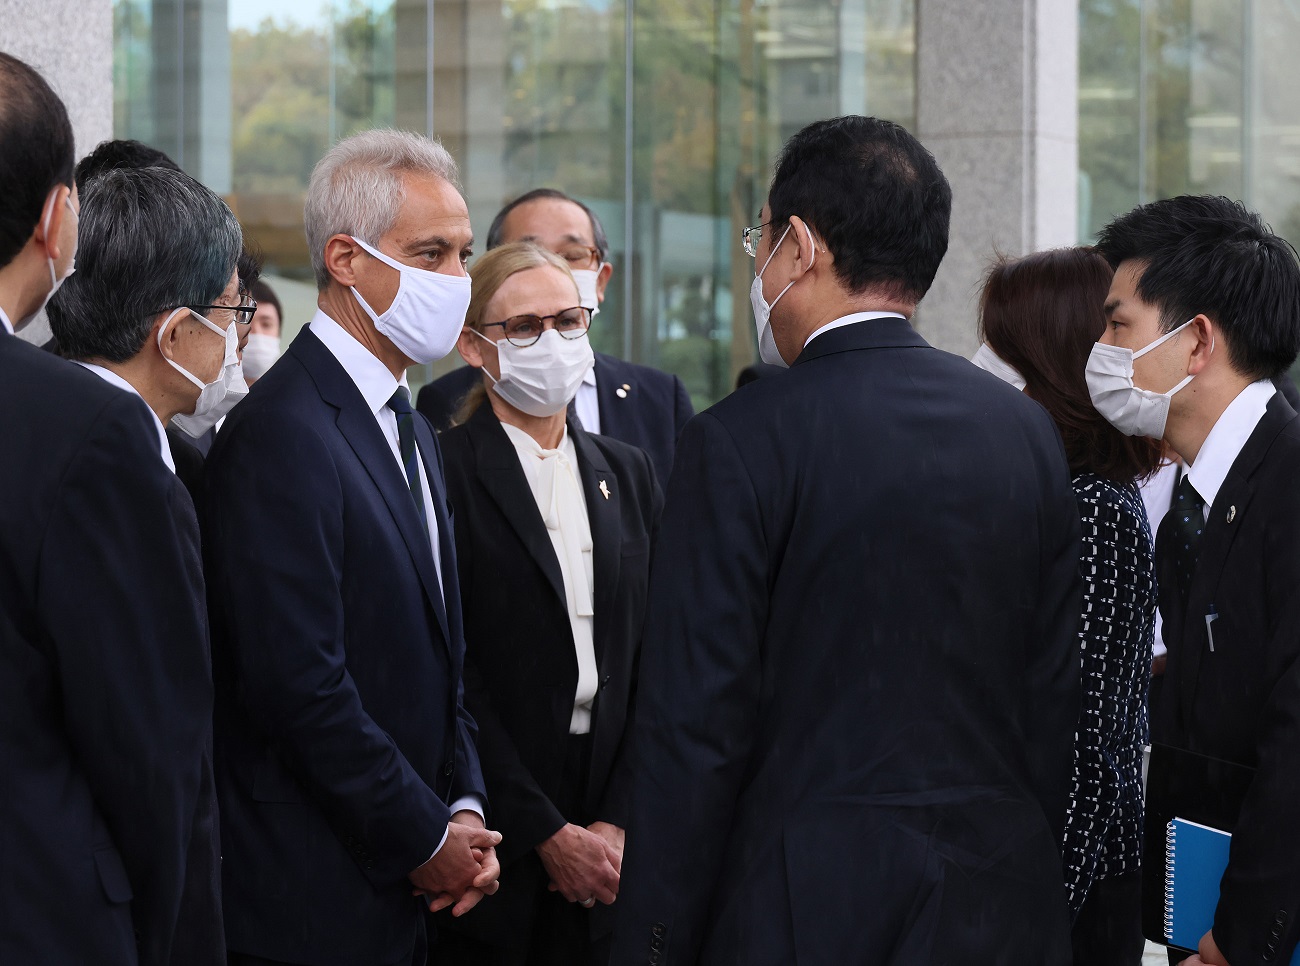 Photograph of the Prime Minister conversing with U.S. Ambassador to Japan Rahm Emanuel